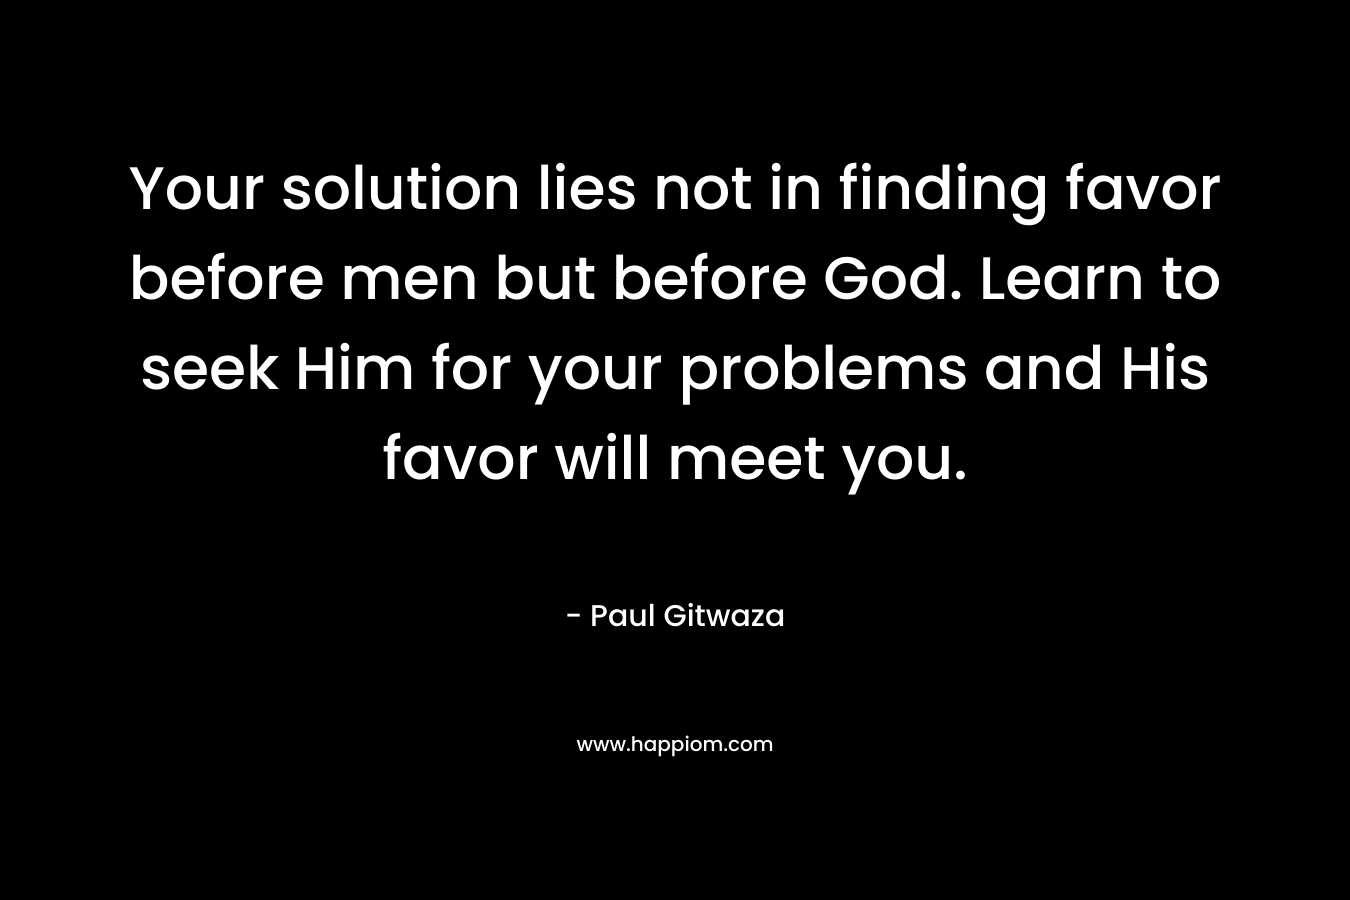 Your solution lies not in finding favor before men but before God. Learn to seek Him for your problems and His favor will meet you.